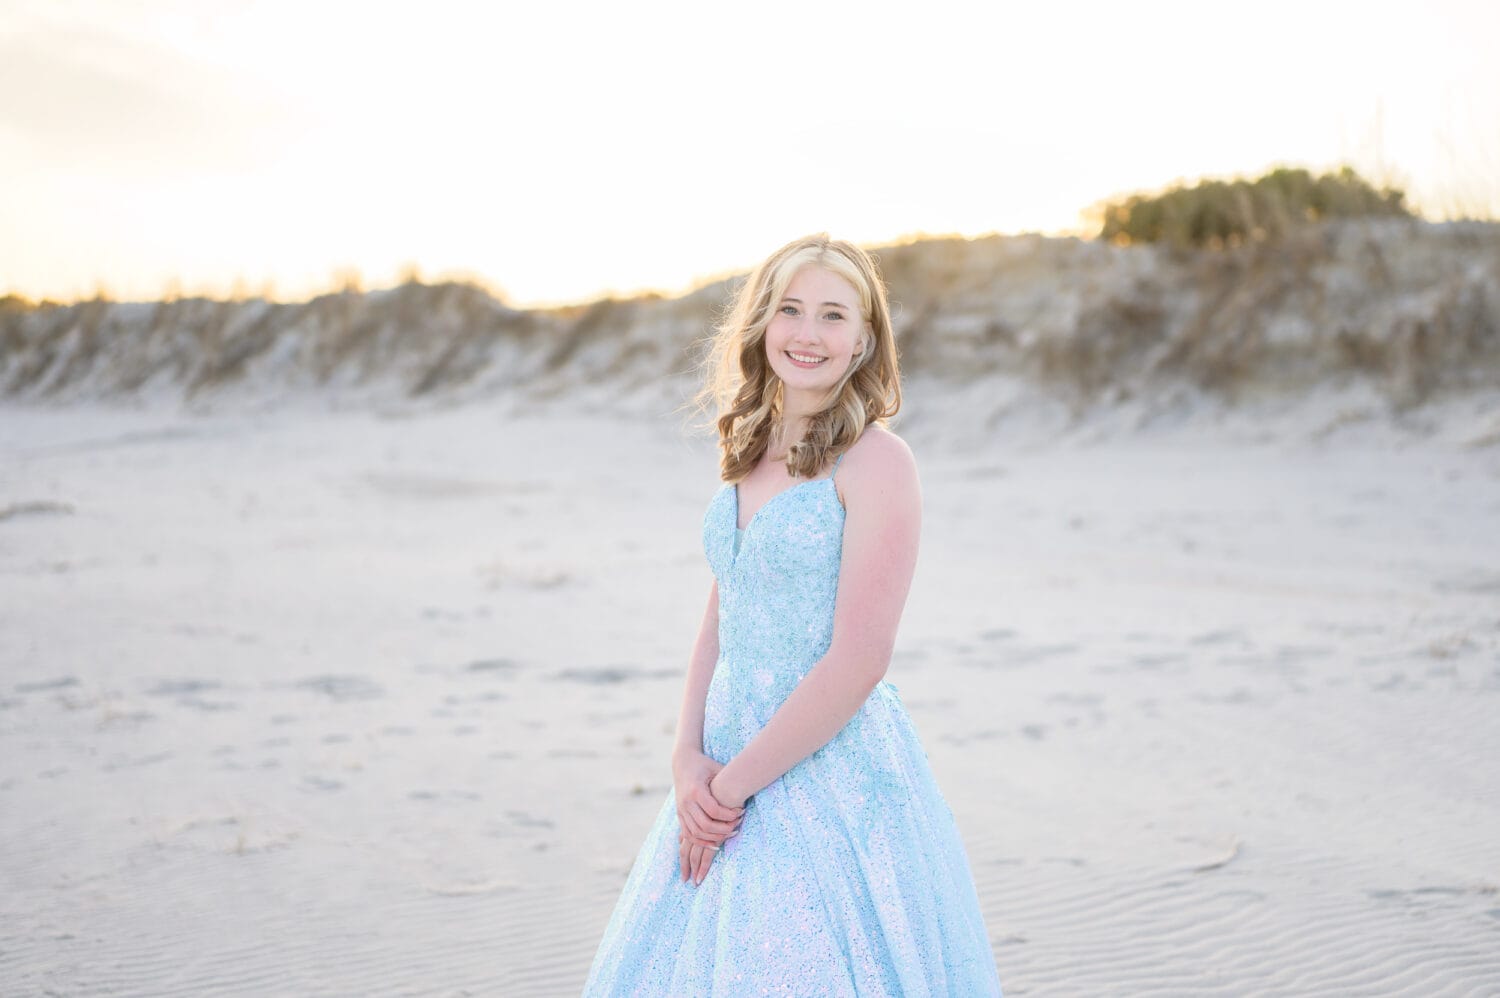 Prom portraits in a sparkly blue gown in front of the dunes - Huntington Beach State Park